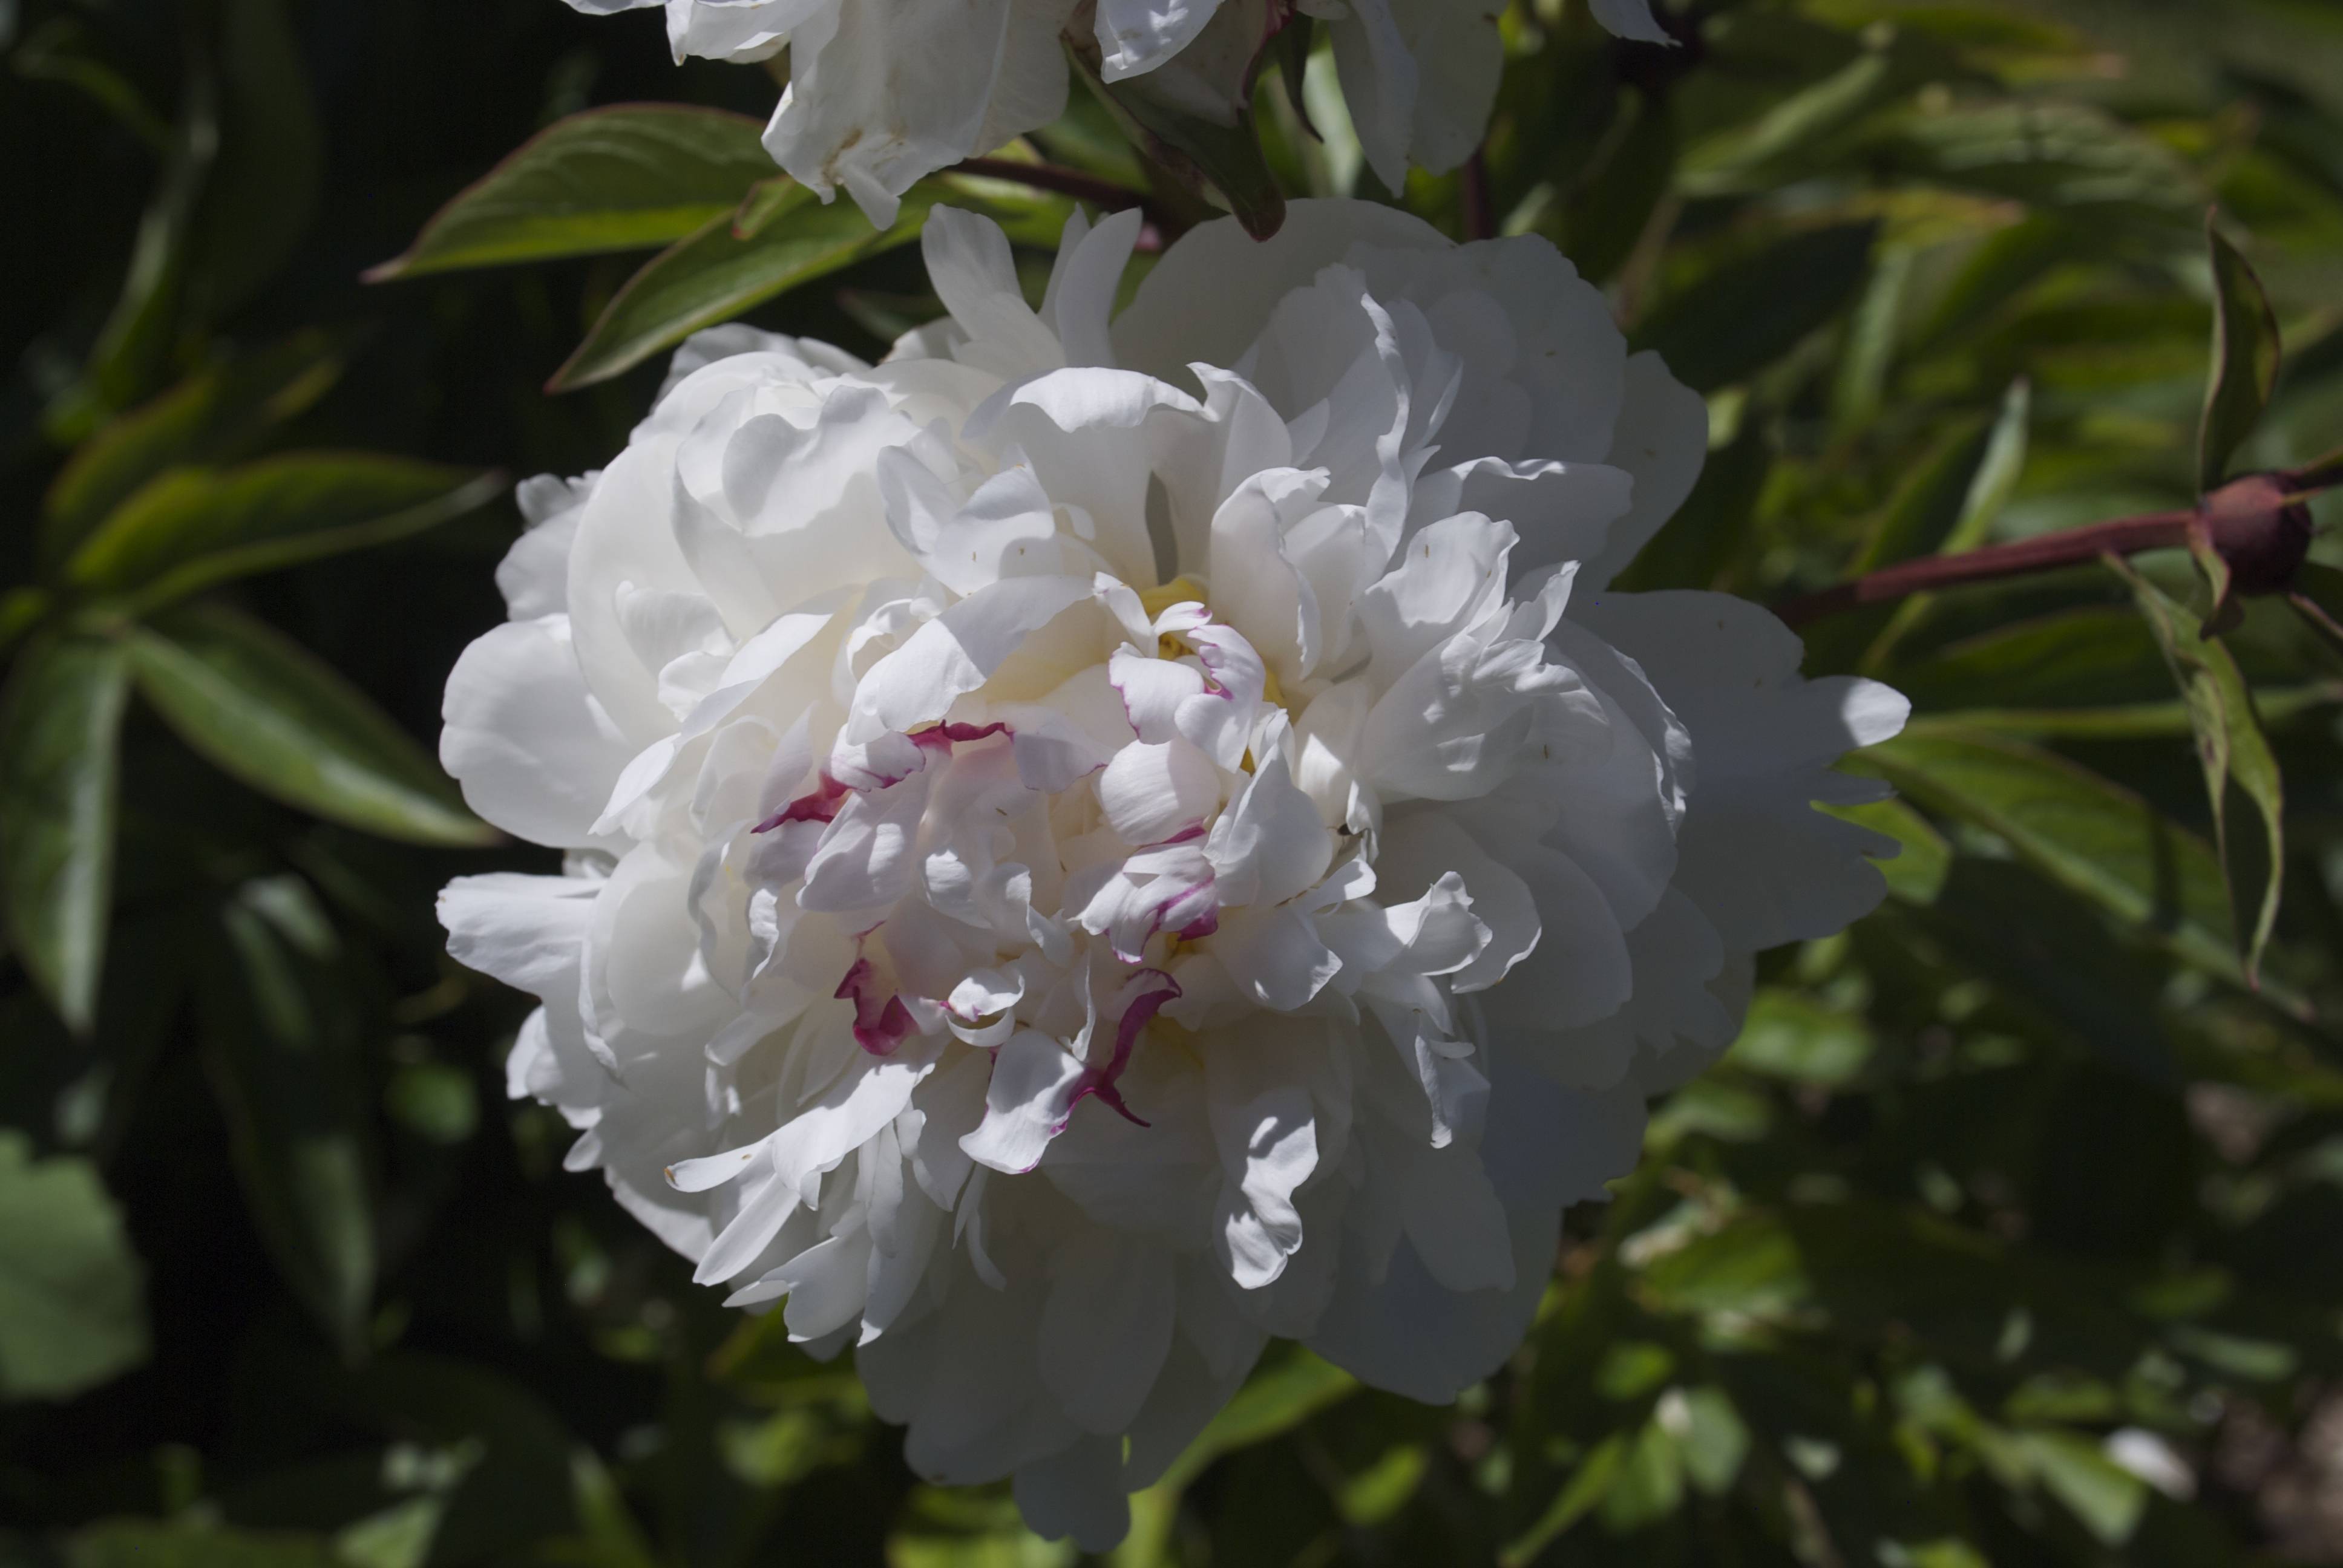 large, white, ruffled, rose-like flowers with multiple layers